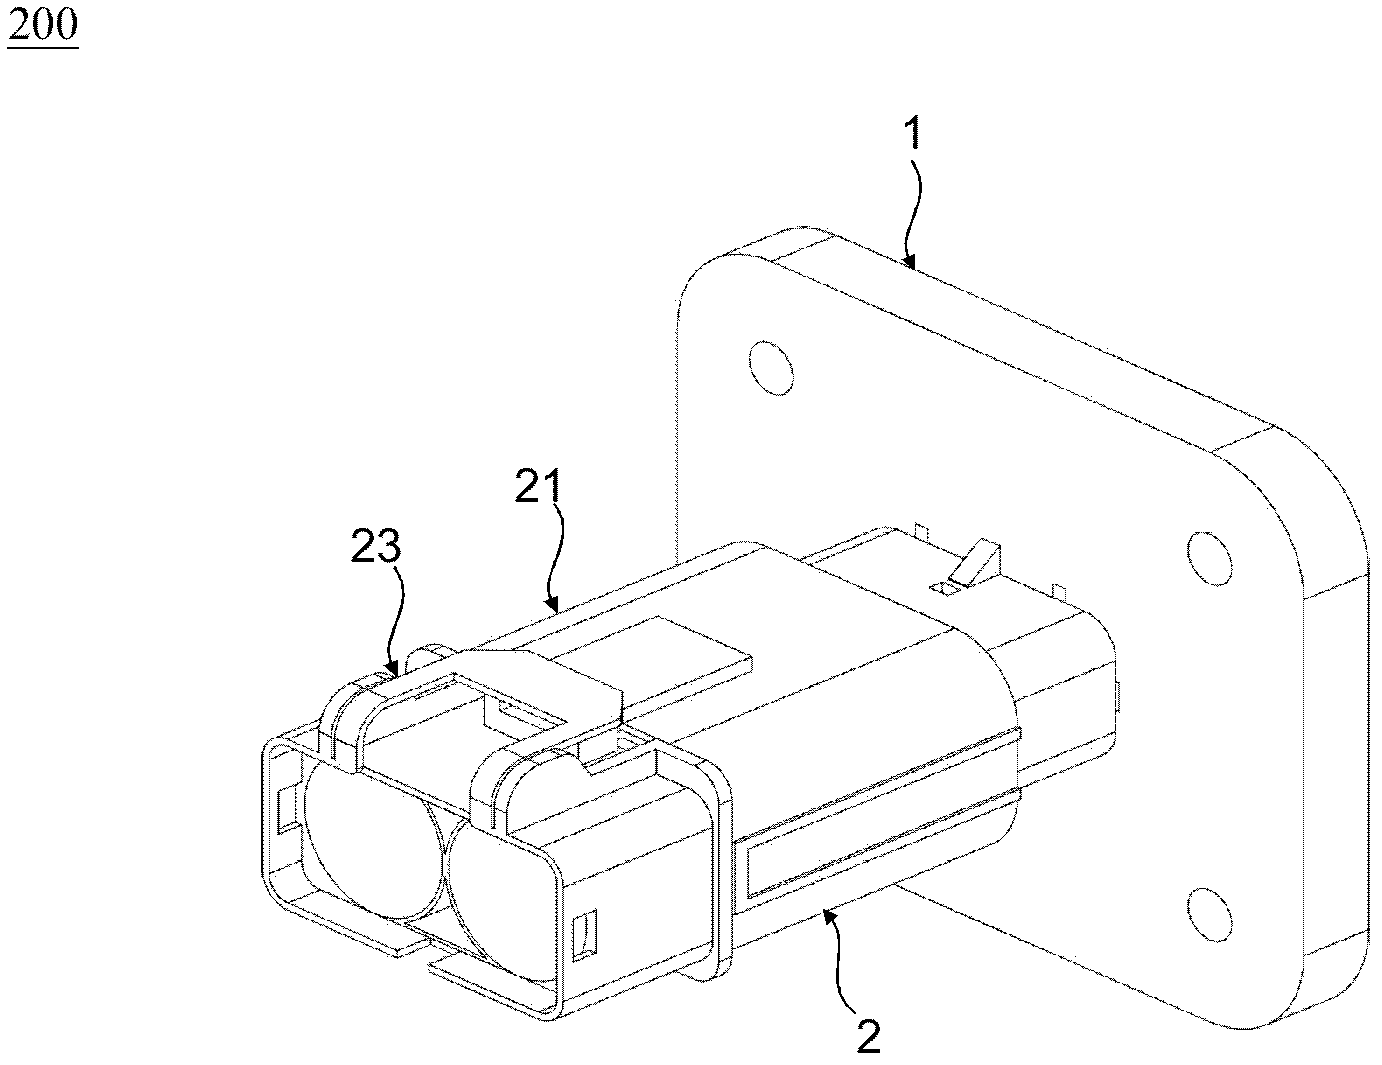 Shielded connector assembly